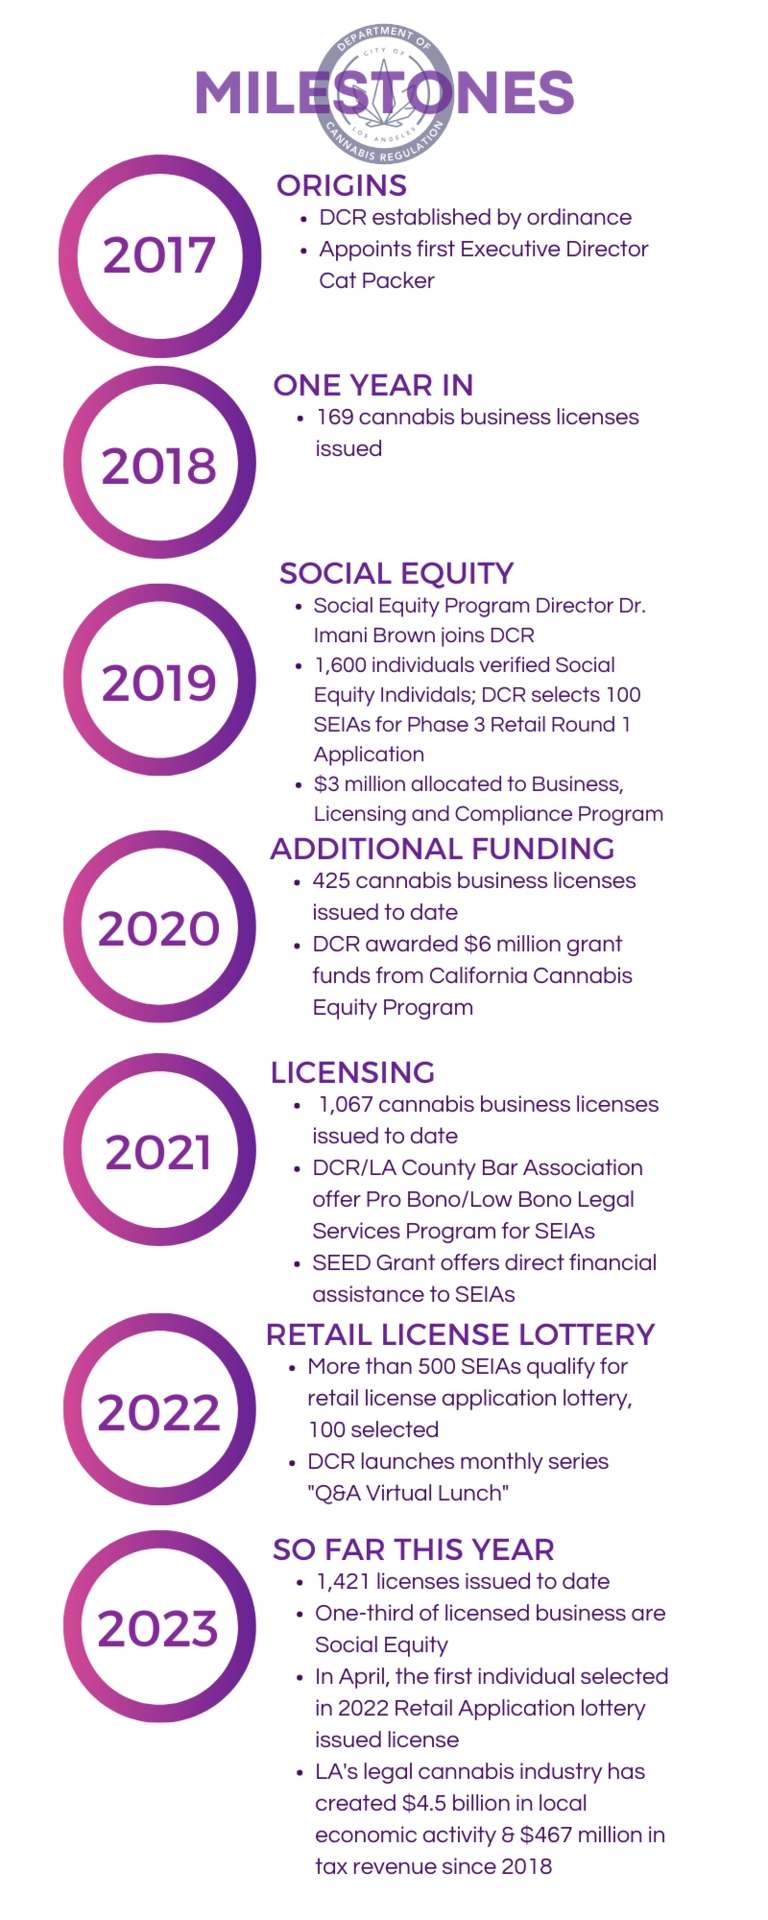 Milestones: 2017 Origins -DCR established by ordinance -Appoints first Executive Director Cat Packer  2018 One year in -169 cannabis business licenses issued  2019 Social Equity -Social Equity Program Director Dr. Imani Brown joins DCR -1,600 individuals verified Social Equity Individuals; DCR selects 100 SEIAs for Phase 3 Retail Round 1 Application -$3 million allocated to Business, Licensing and Compliance Program  2020 additional funding -425 cannabis business licenses issued to date -DCR awarded $6 mill